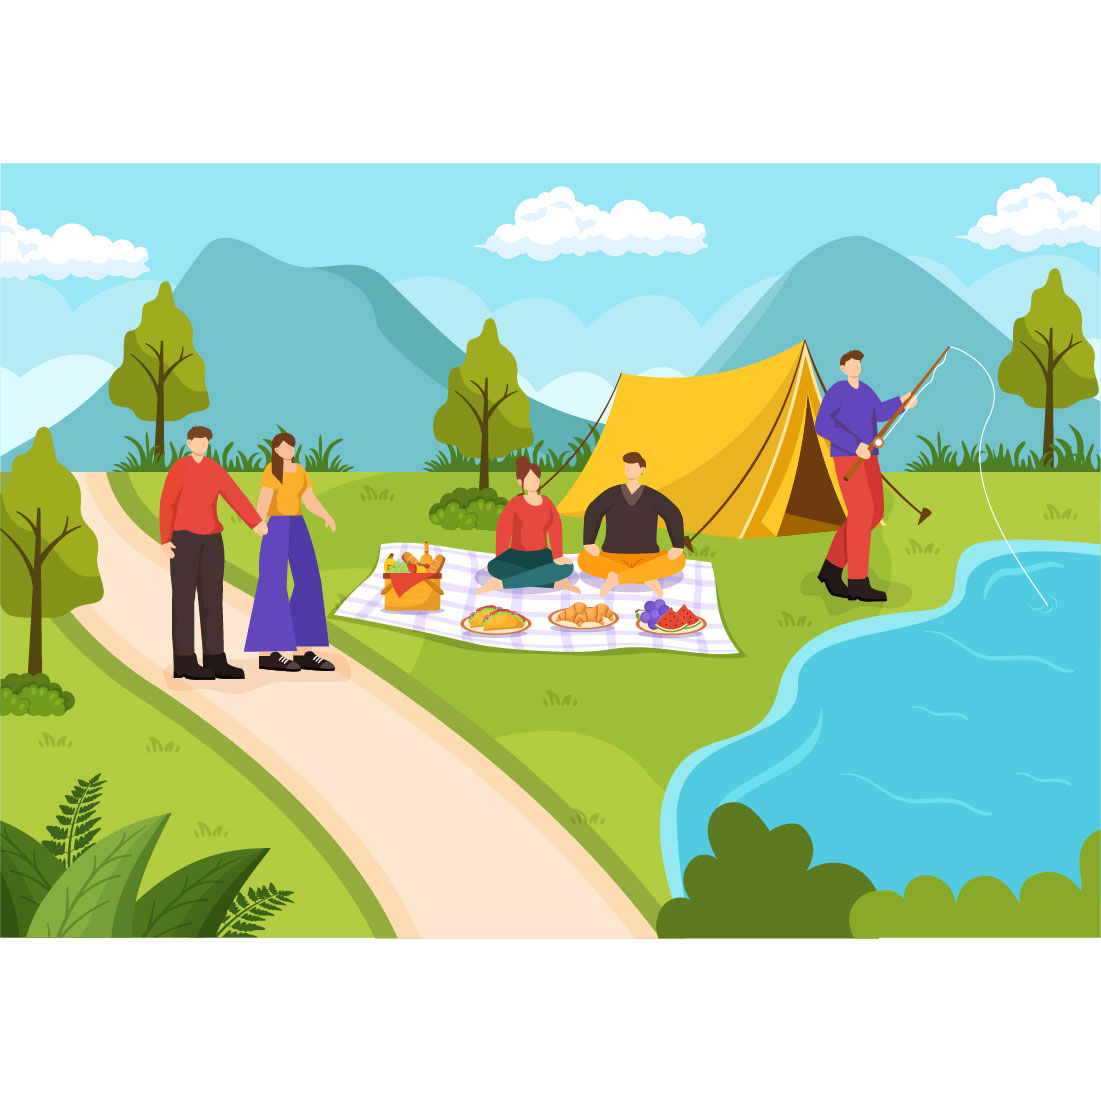 12 Outdoor Activity Illustration cover image.